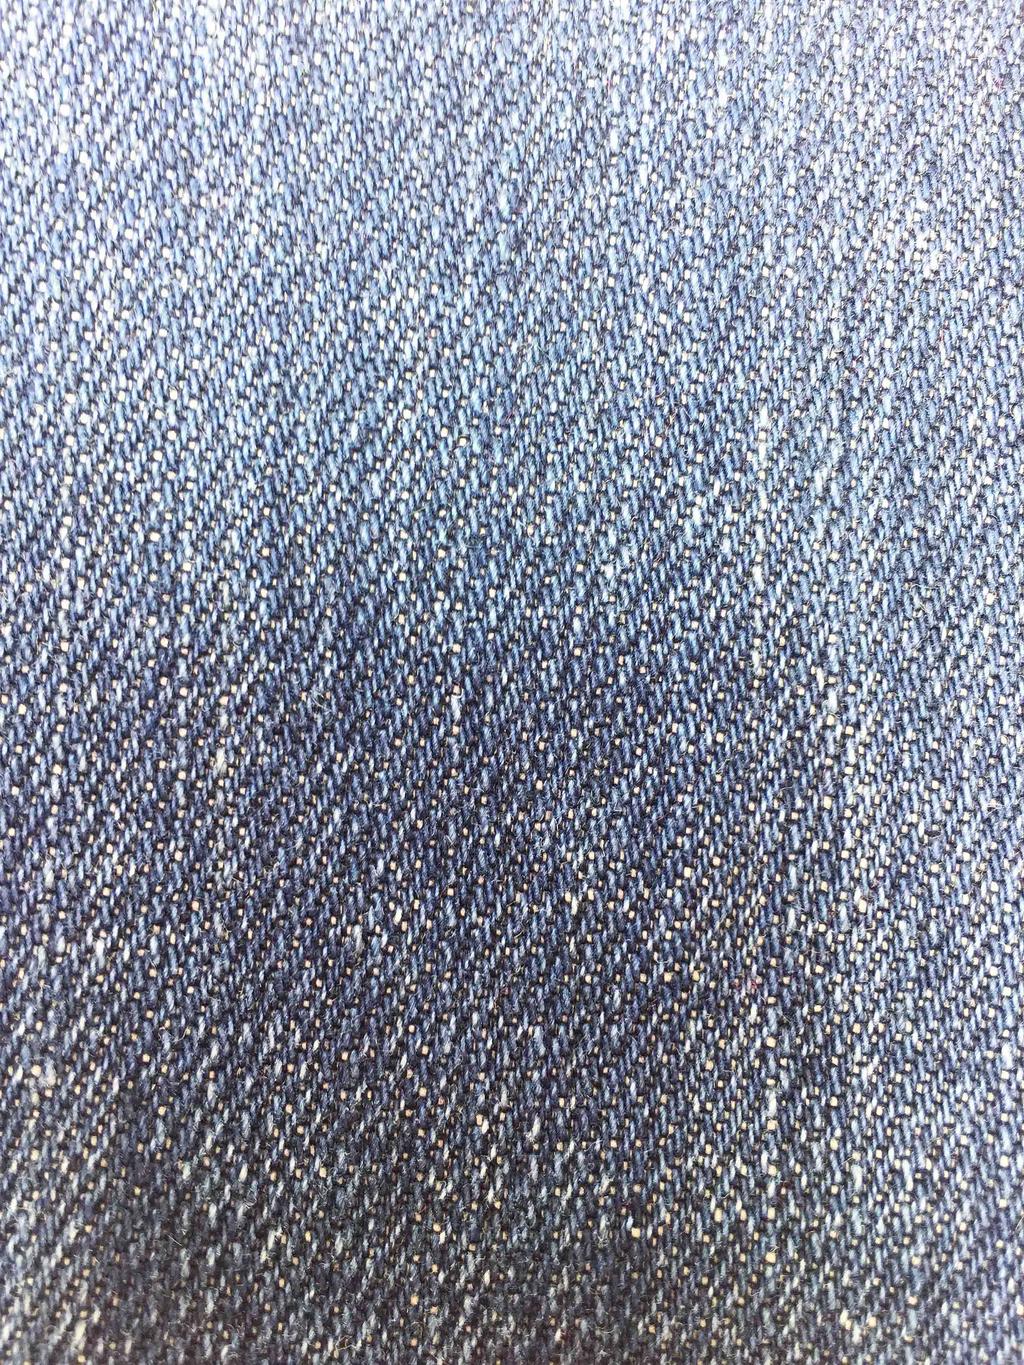 Cotton Denim Source: Cotton Construction: Woven (twill weave) Properties: Strong, hardwearing, absorbent Other learning links: Sustainability issues linked to